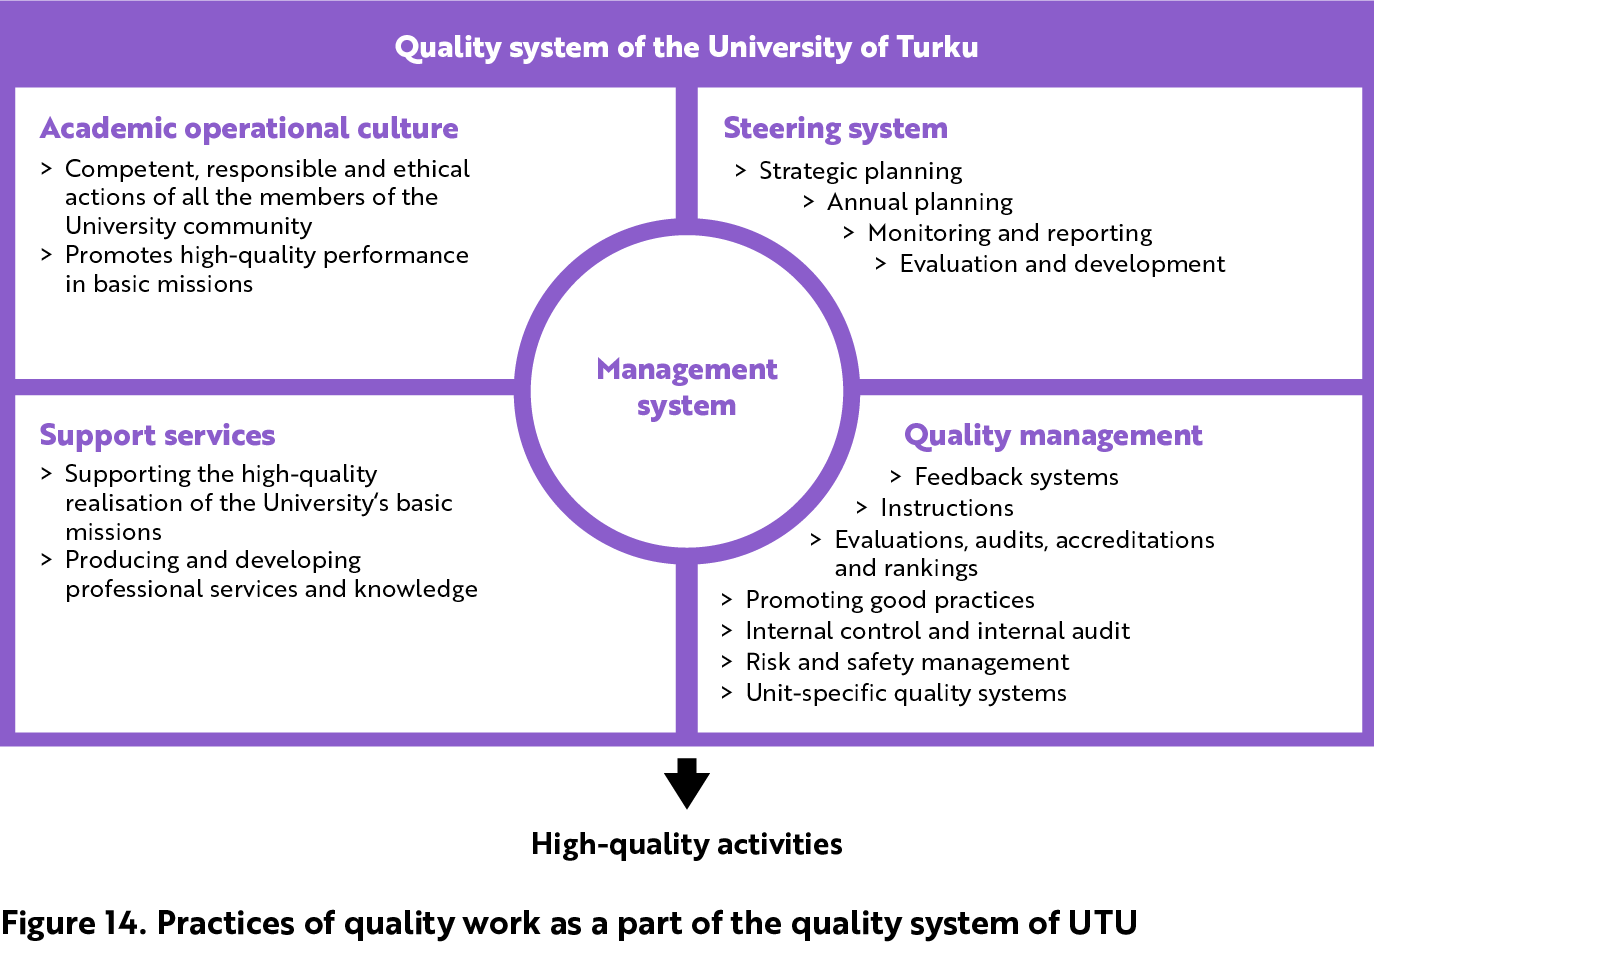 Steered by the University’s management system, the quality system consists of practices supporting high-quality activities and includes academic operational culture, steering system, support services, and quality management. Academic operational culture includes competent, responsible and ethical actions of all the members of the University community. It promotes high-quality performance in basic missions. Steering system includes strategic planning, annual planning, monitoring and reporting, evaluation and development. Quality management includes feedback systems, instructions, evaluations, audits, accreditations and rankings, promoting good practices, internal control and internal audit, risk and safety management and unit-specific quality systems. Support services include supporting the high-quality realisation of the University’s basic missions and producing and developing professional services and knowledge. 